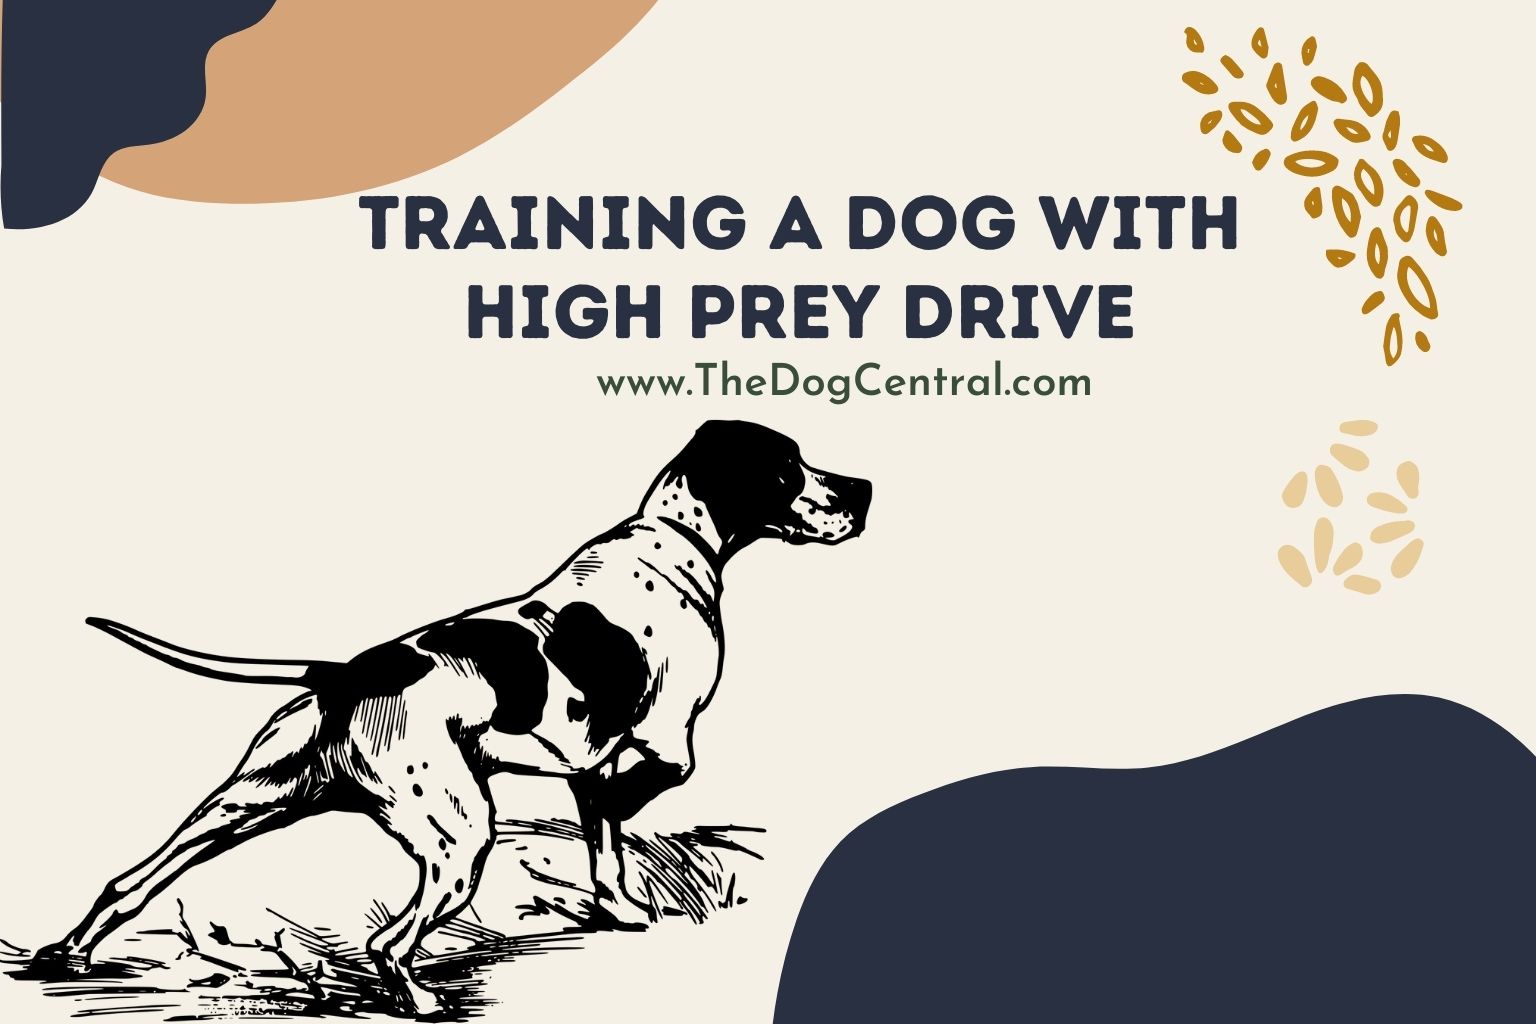 Training a Dog With High Prey Drive